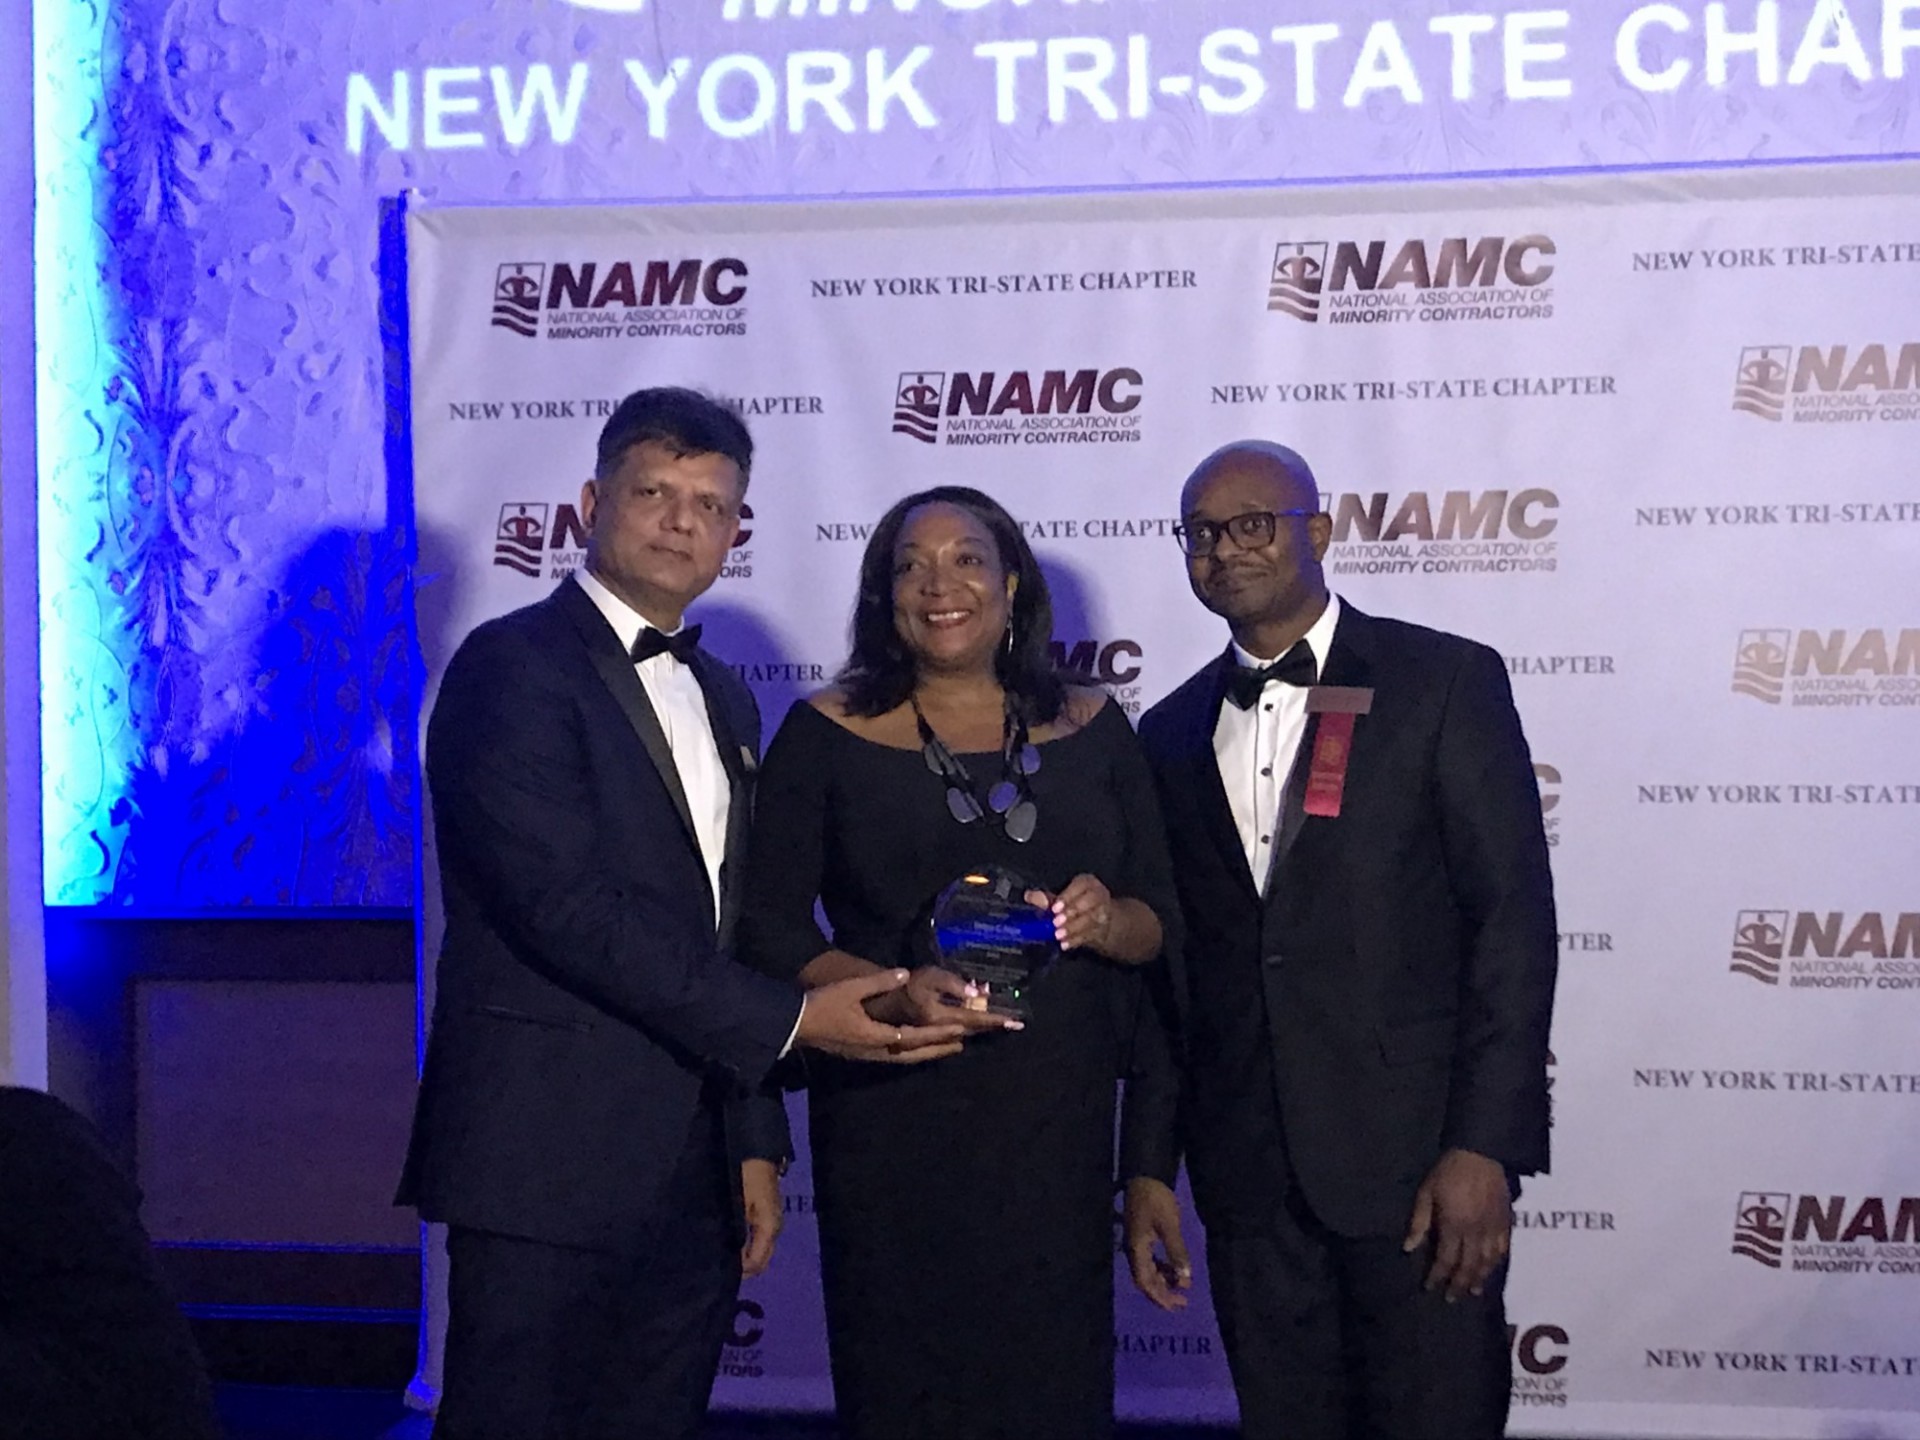 Columbia University received the 2018 Diversity Champion Award from the New York Tri-State Chapter of the National Association of Minority Contractors (NAMC-NY) for the University’s dedication to growing opportunities for minority-, women-, and locally-owned (MWL) business enterprises.